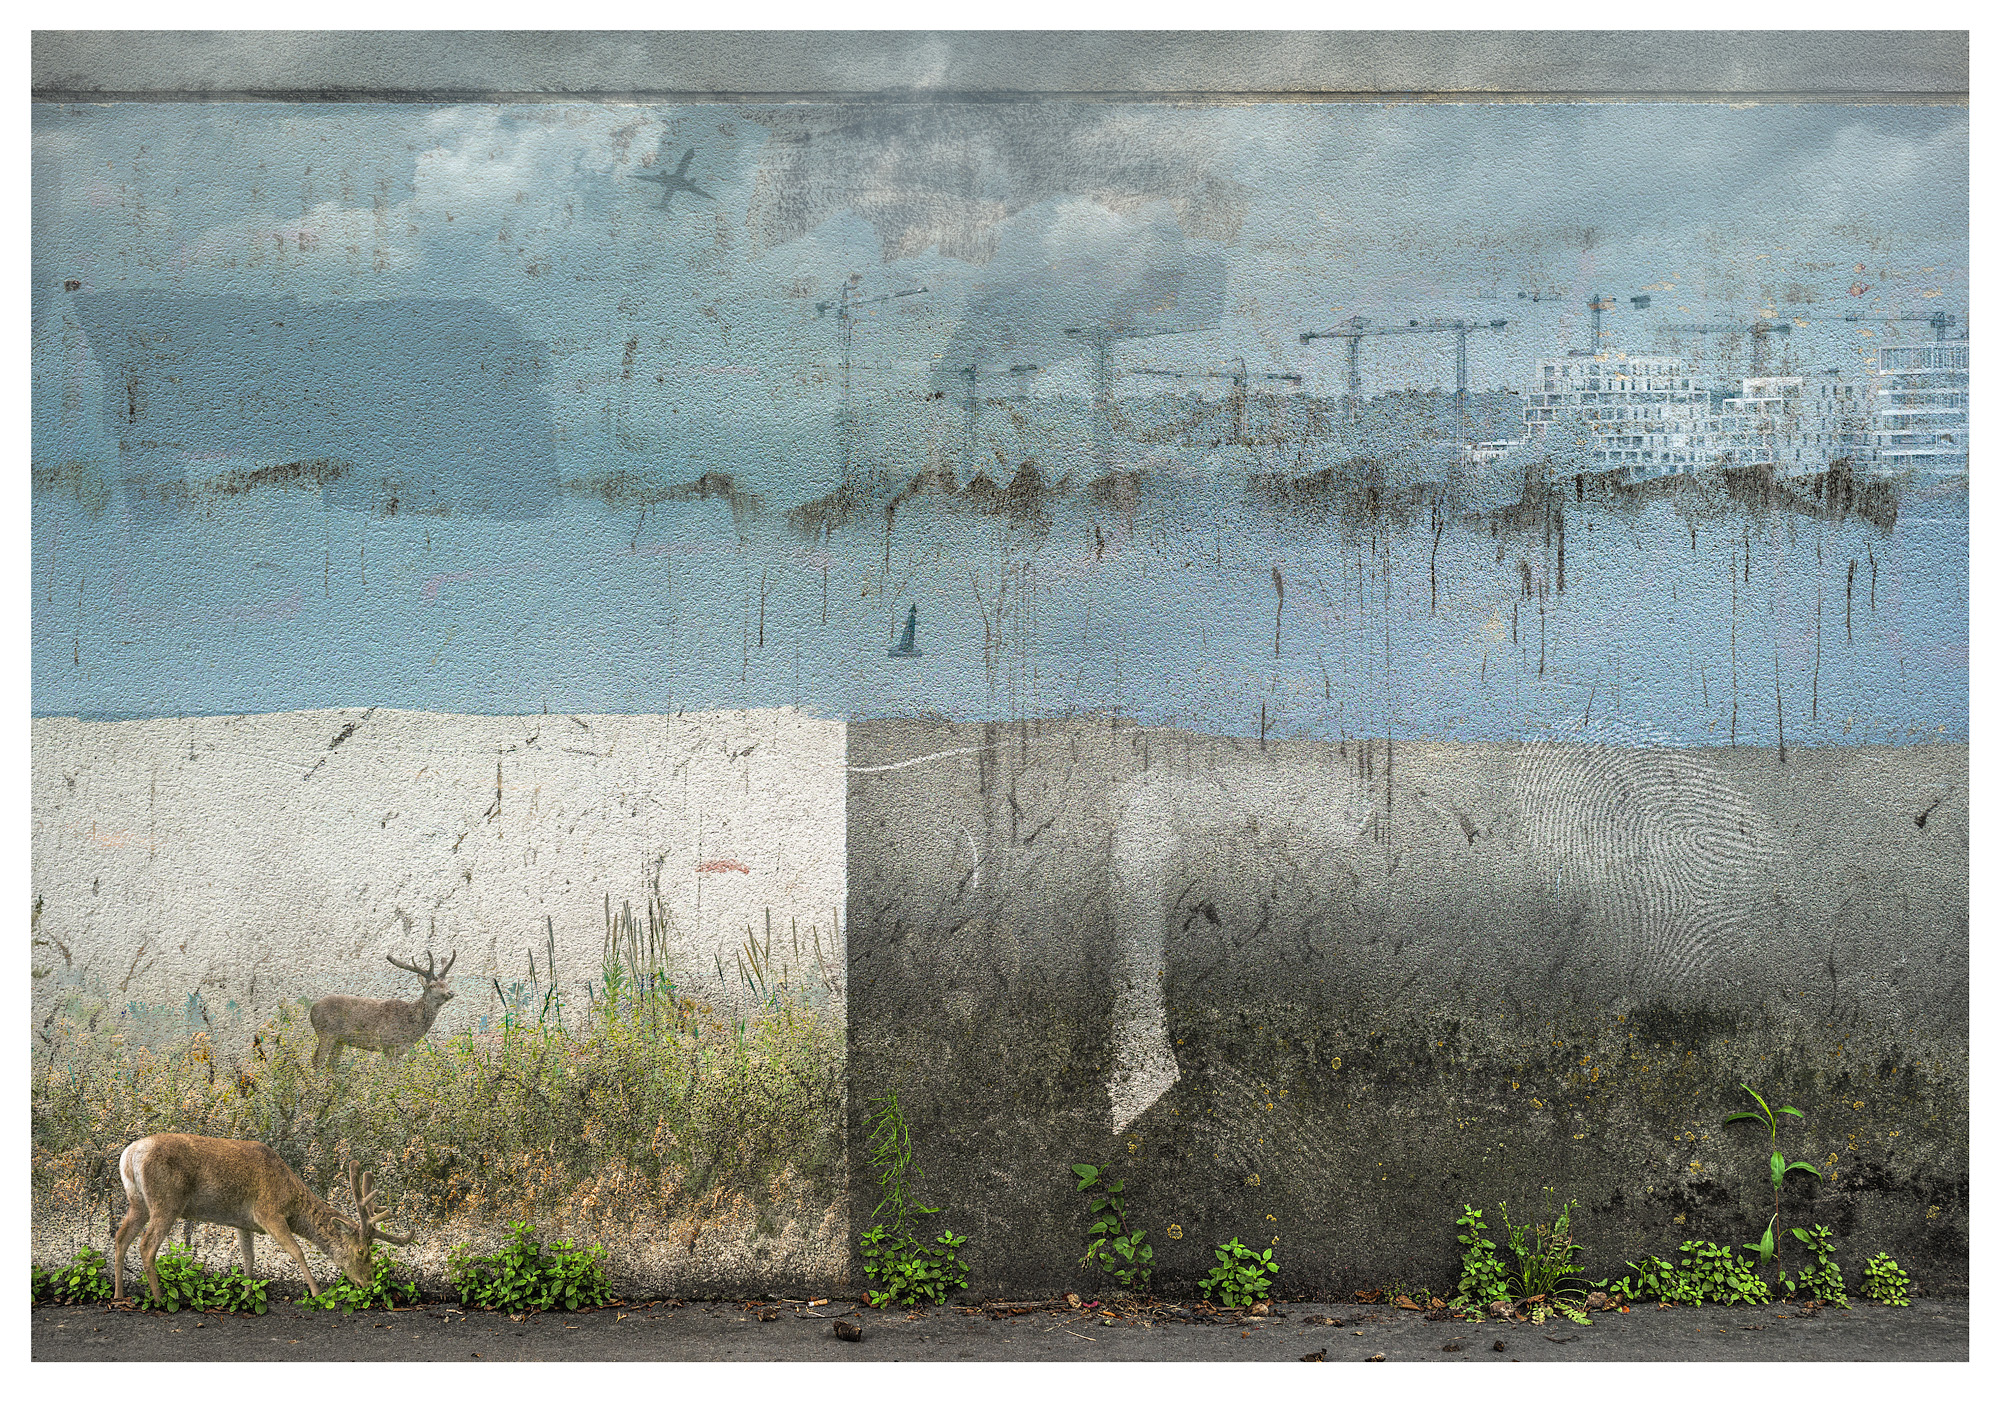 Composite photograph of weathered lichen covered wall showing a distant skyscaper city. On bottom of the fram blue wave attack the shoreline. To the left red and white flowers show partial swampimg in the sea water